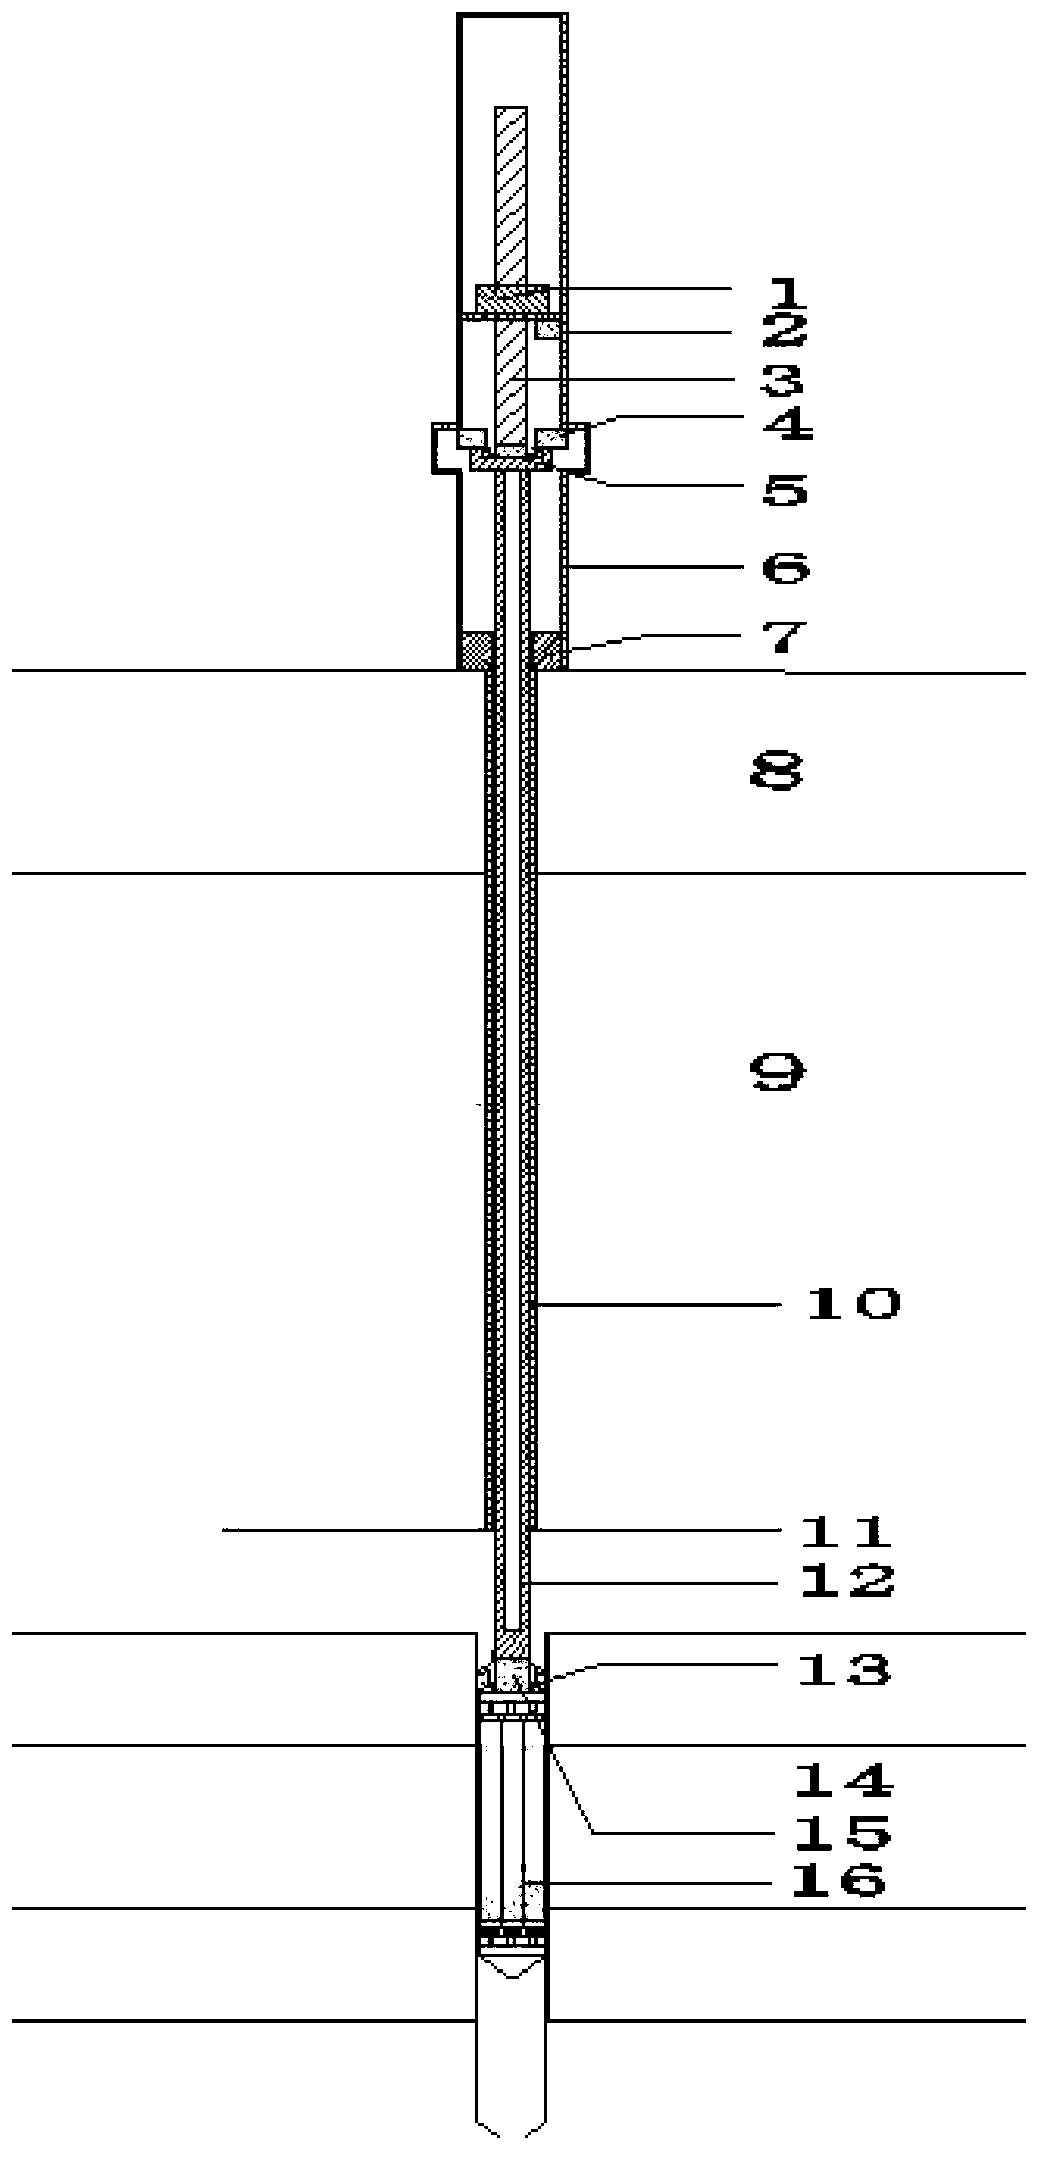 Safety rod driving system of liquid heavy metal cooling reactor